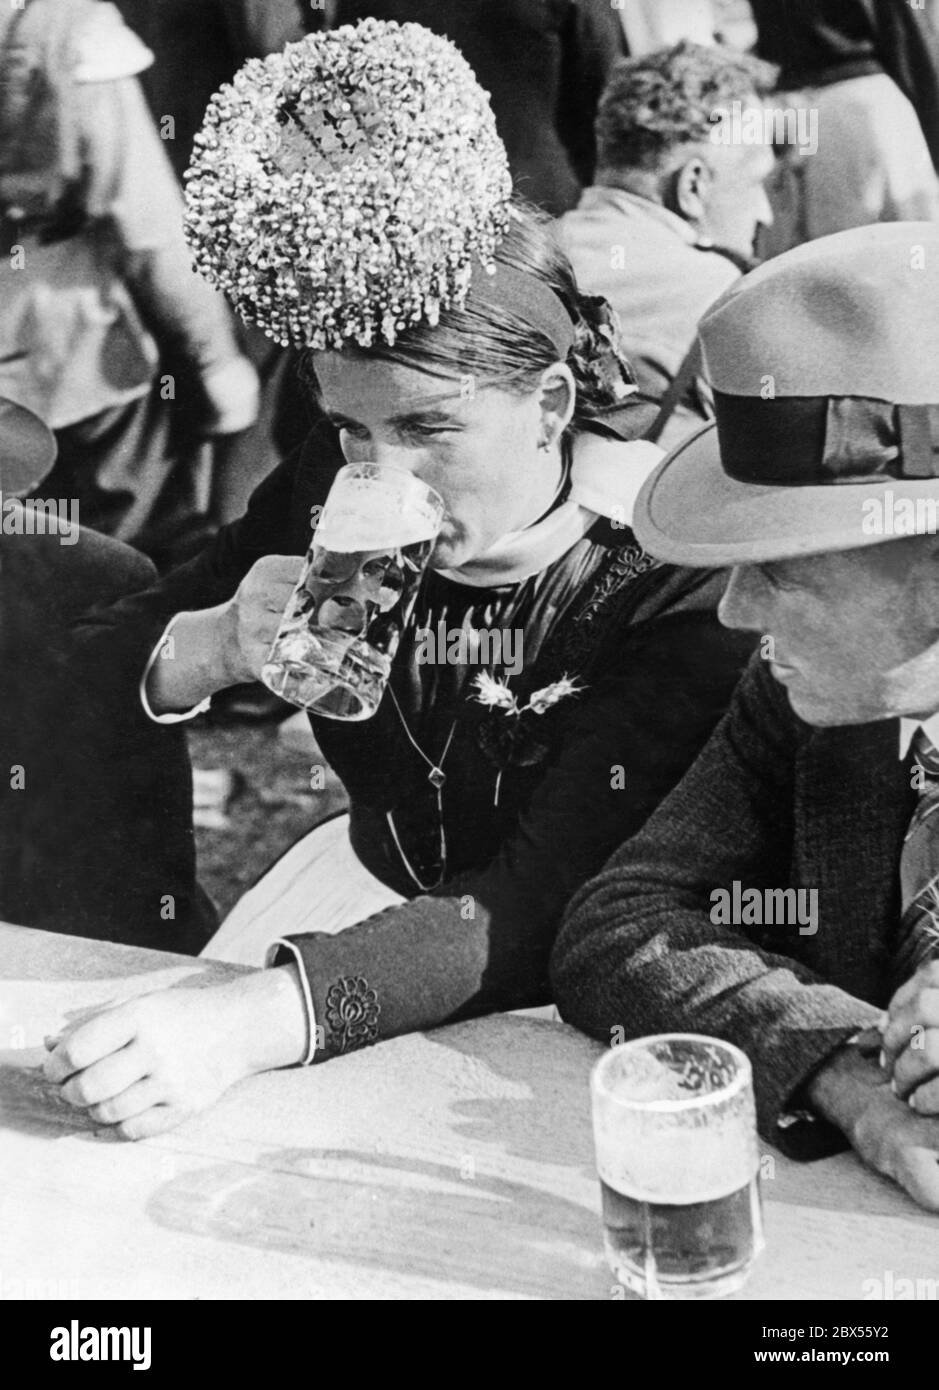 A woman wears a festive folk costume with a Schaeppel (bridal crown) and drinks beer at the harvest festival in Schapbachtal in the Black Forest. This picture was probably taken in the 1930s. Stock Photo